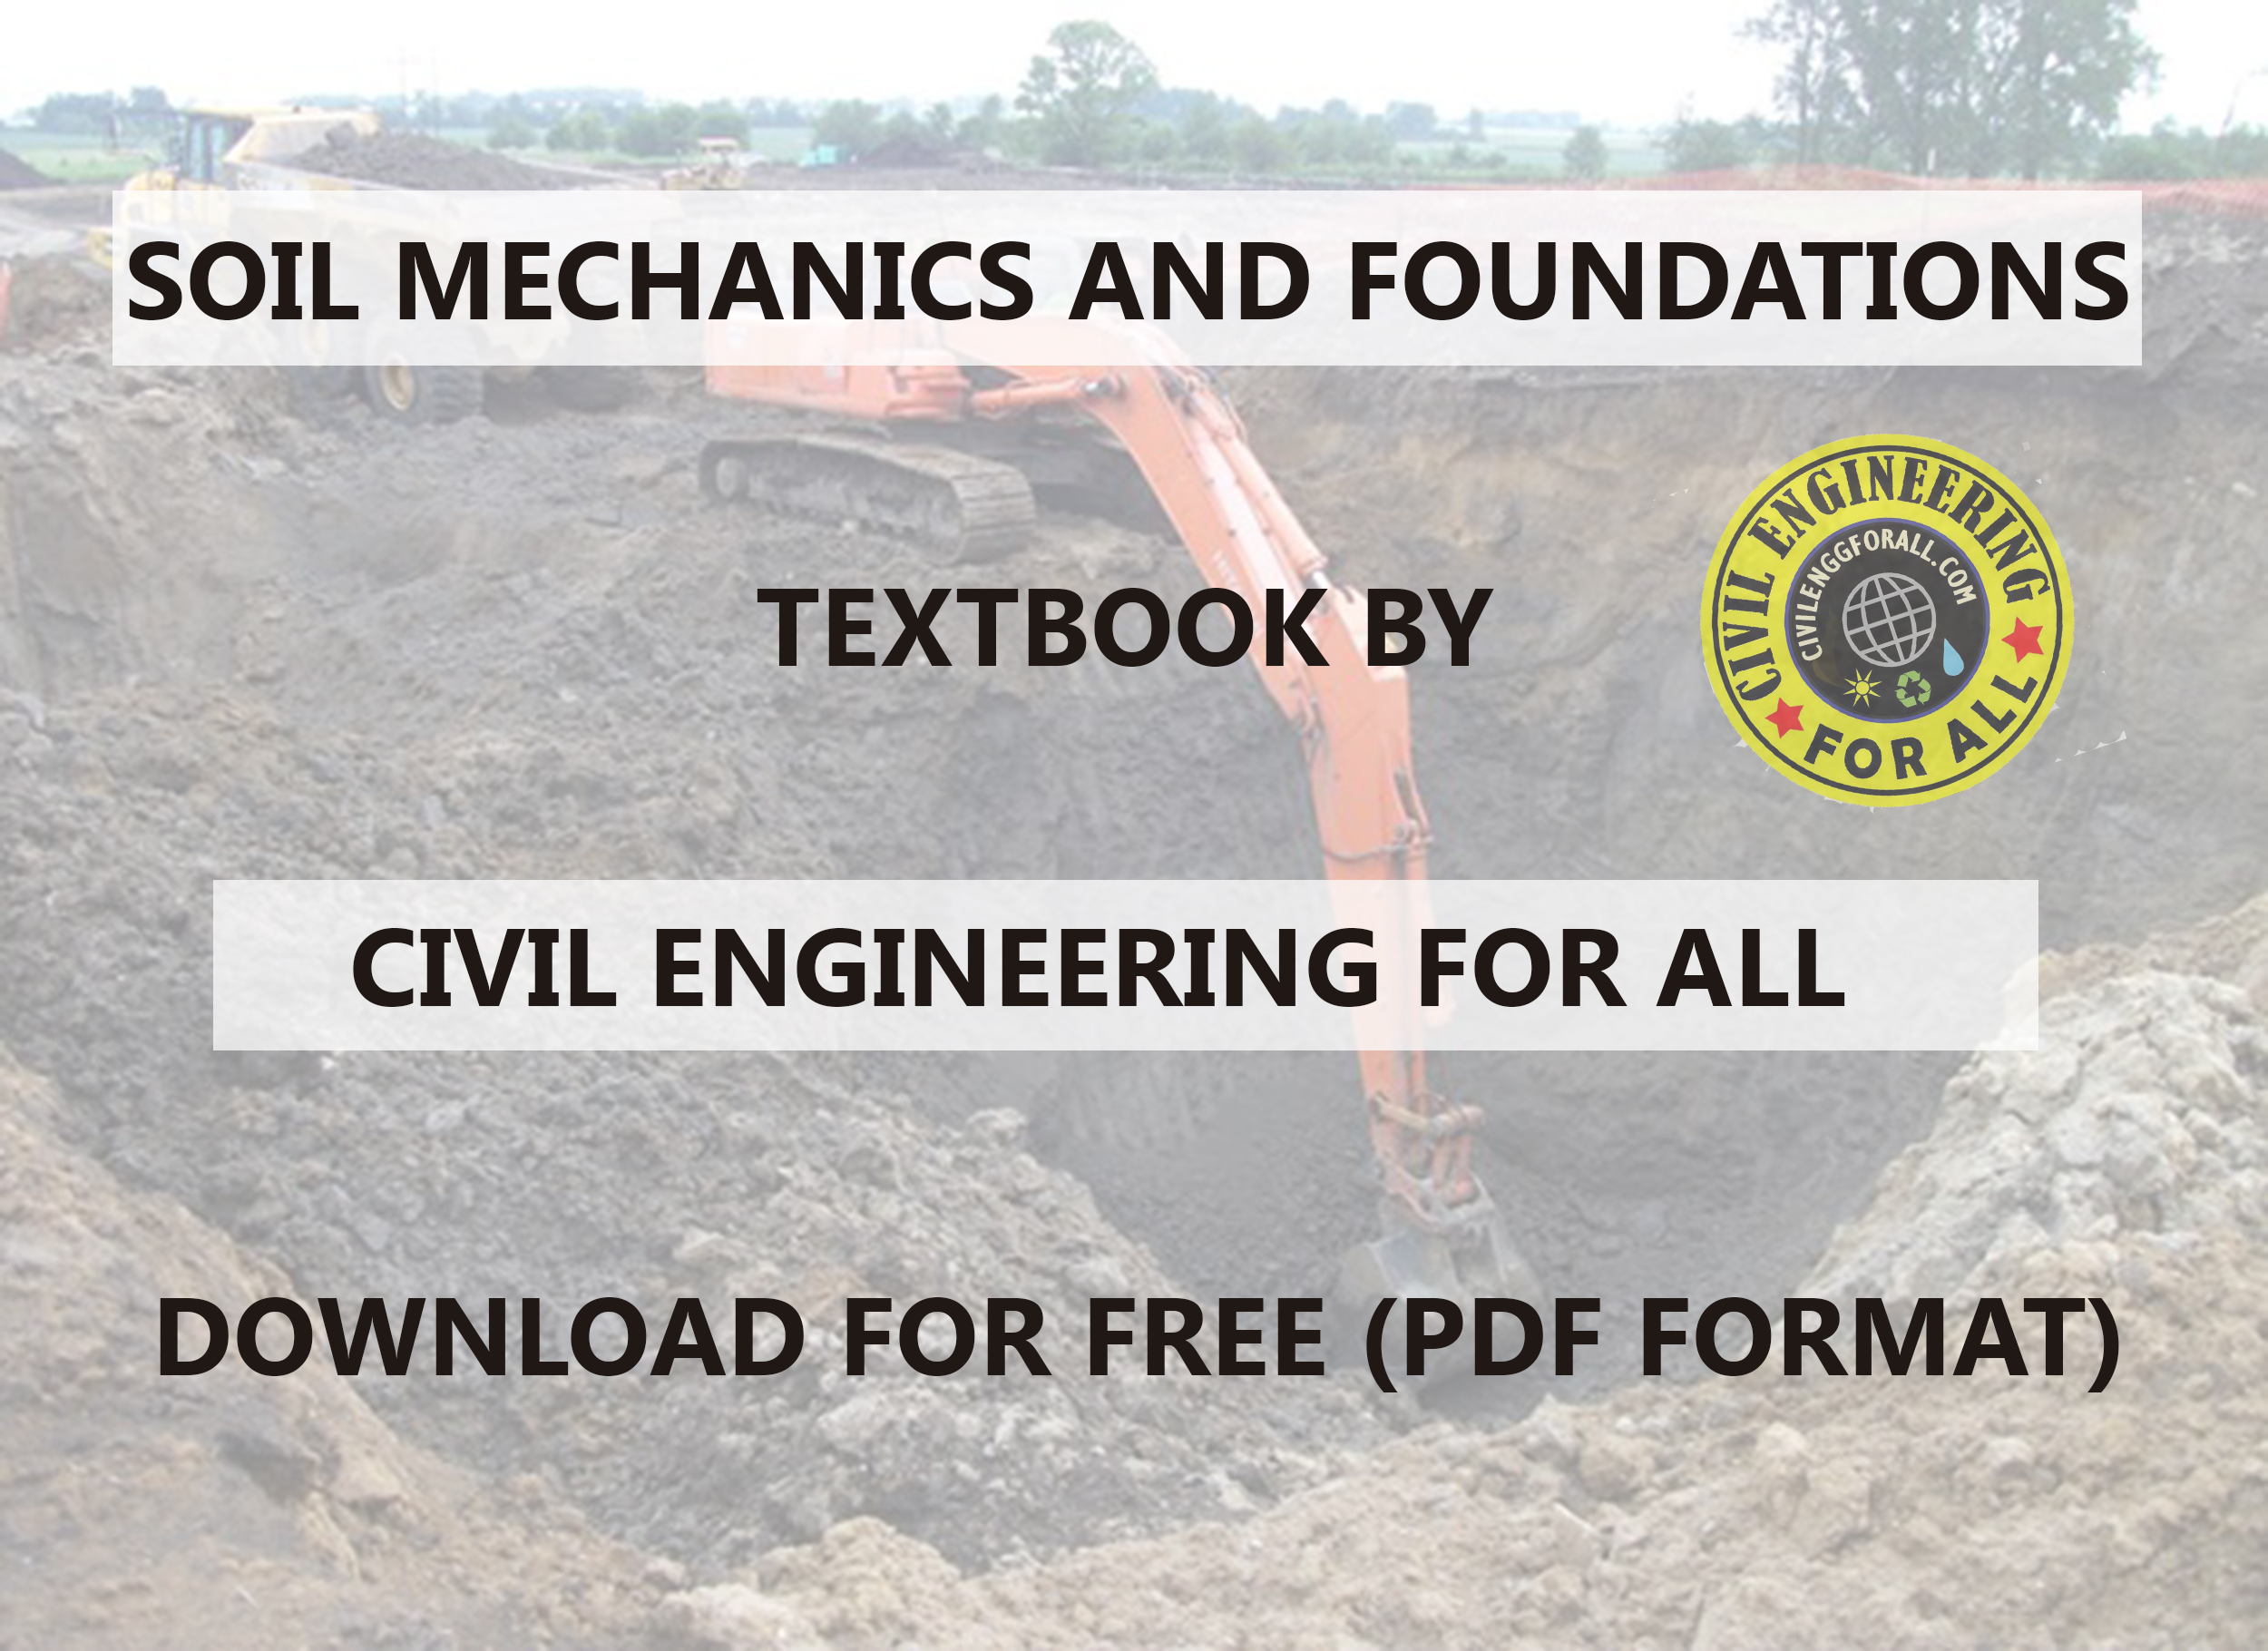 Soil Mechanics and Foundations Textbook by CivilEnggForAll